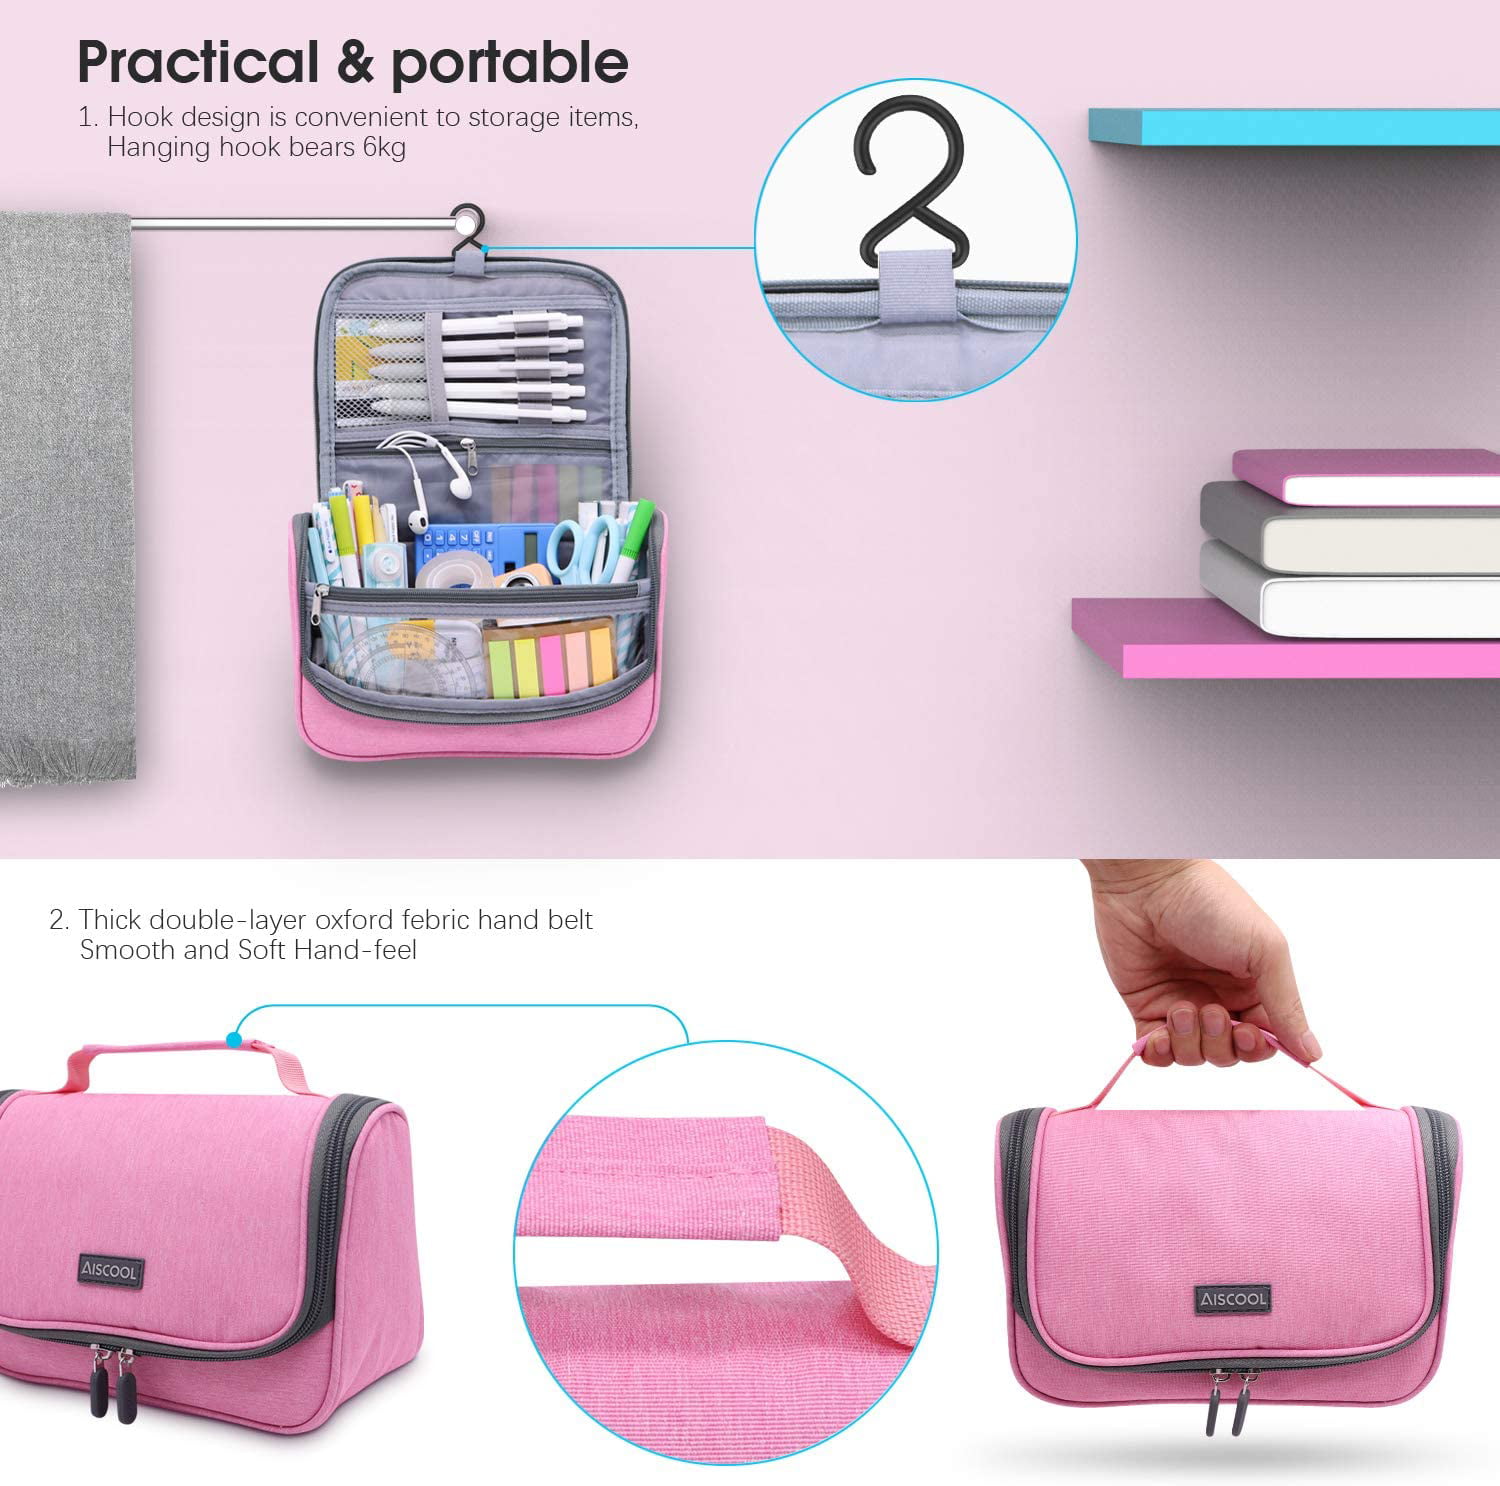 Pink Aiscool Big Capacity Pen Pencil Case Holder Bag Pen Organizer Pouch Stationery Box Oxford Cloth Dry-wet Separation Portable Travel Hanging Bag Toiletry Bag for School Home Office 